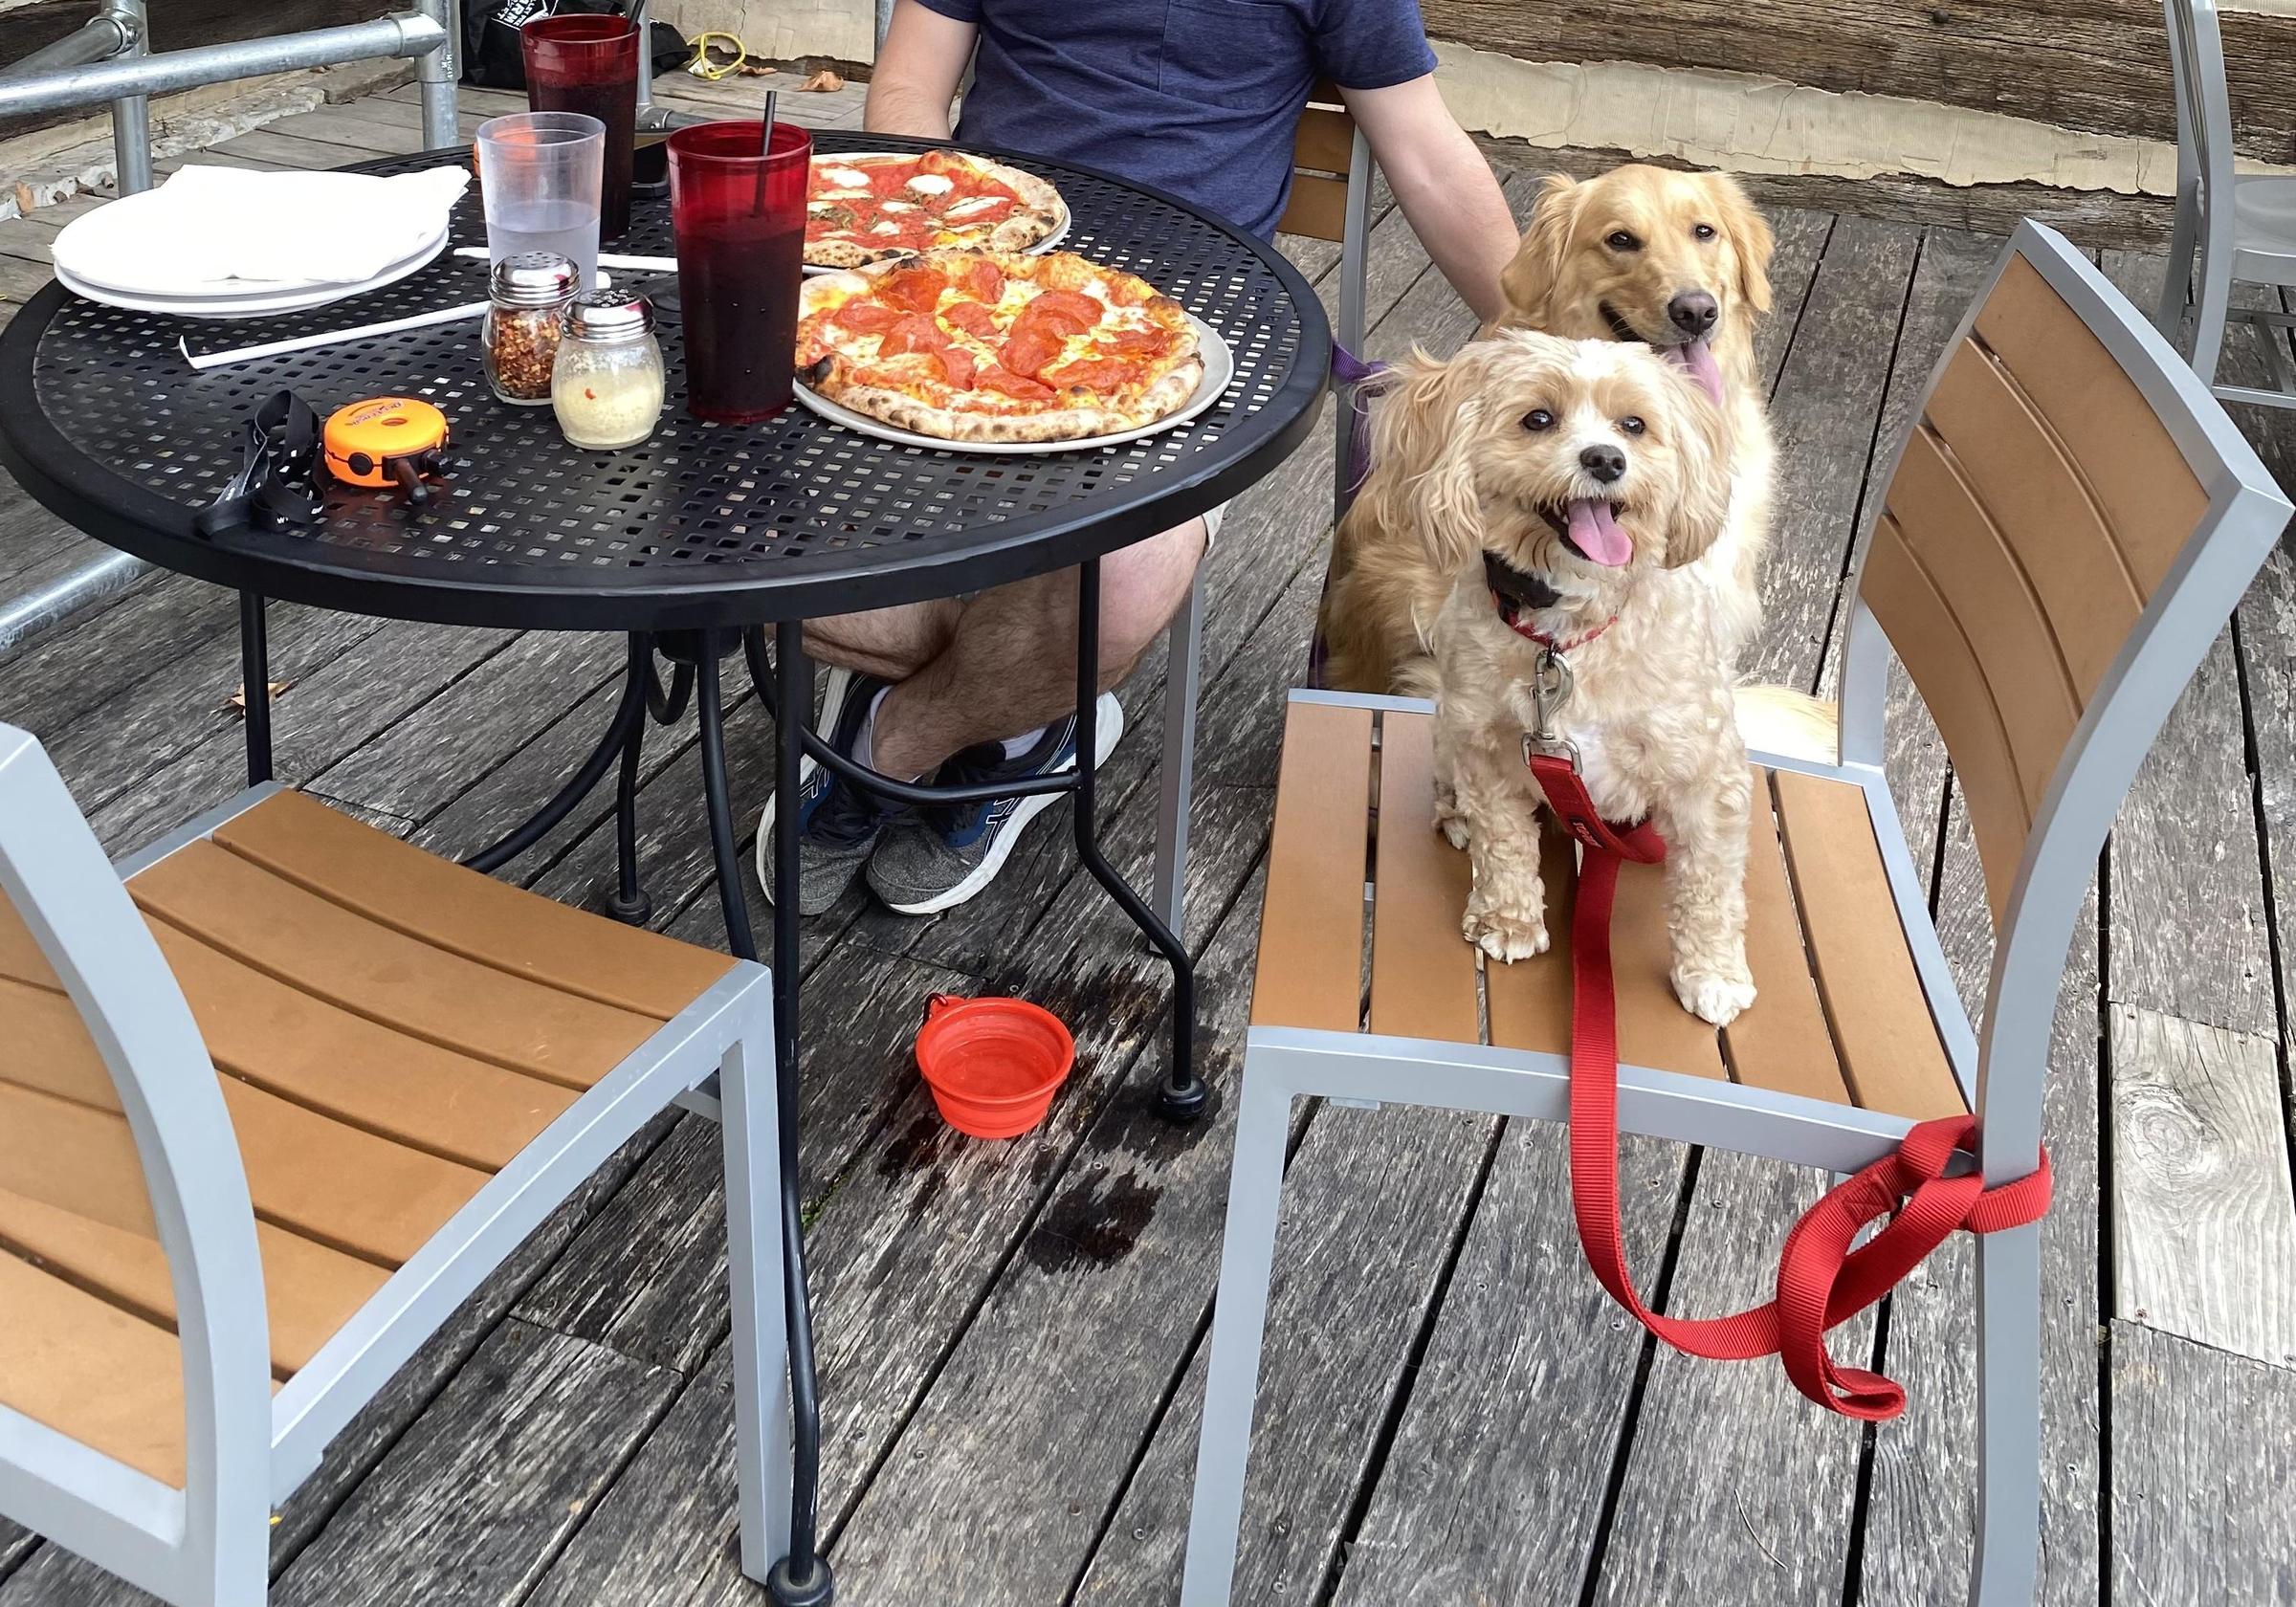 Pet Friendly Hill and Holler Pizza